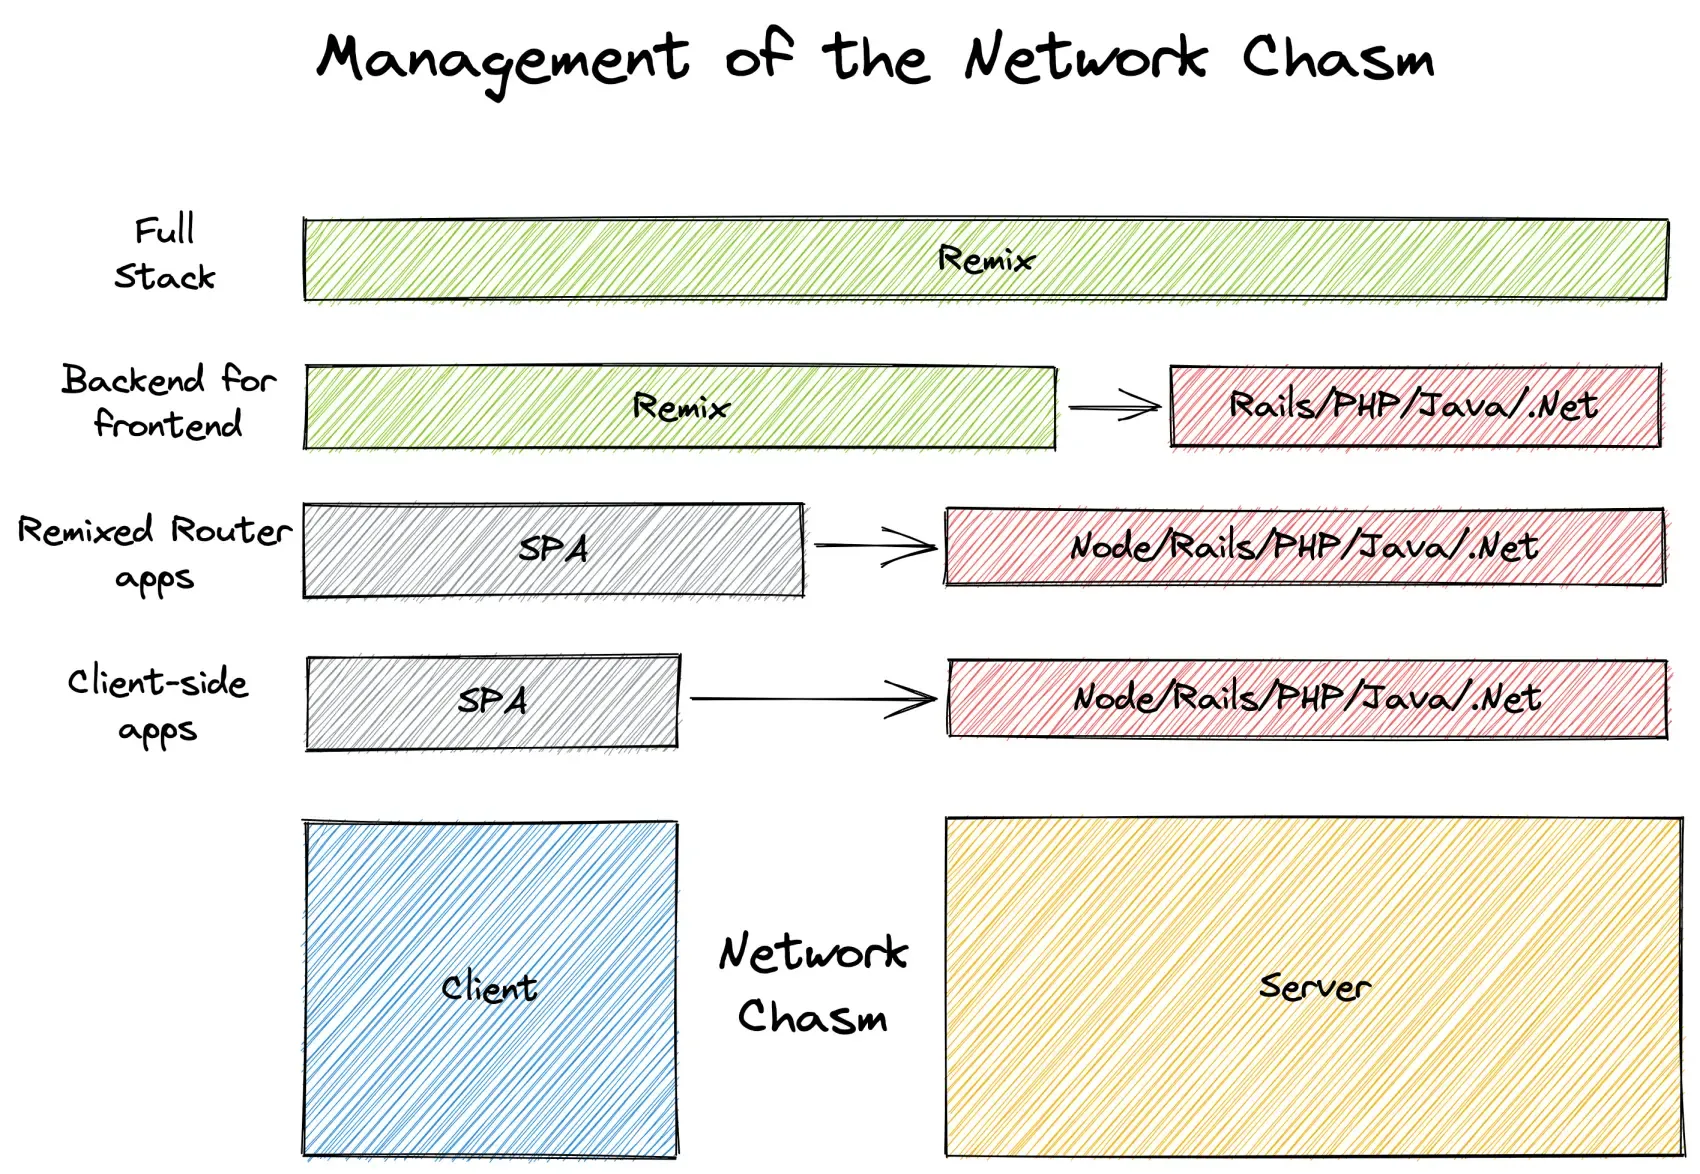 Similar to the previous diagram but showing Remix spanning the client, network chasm, and server